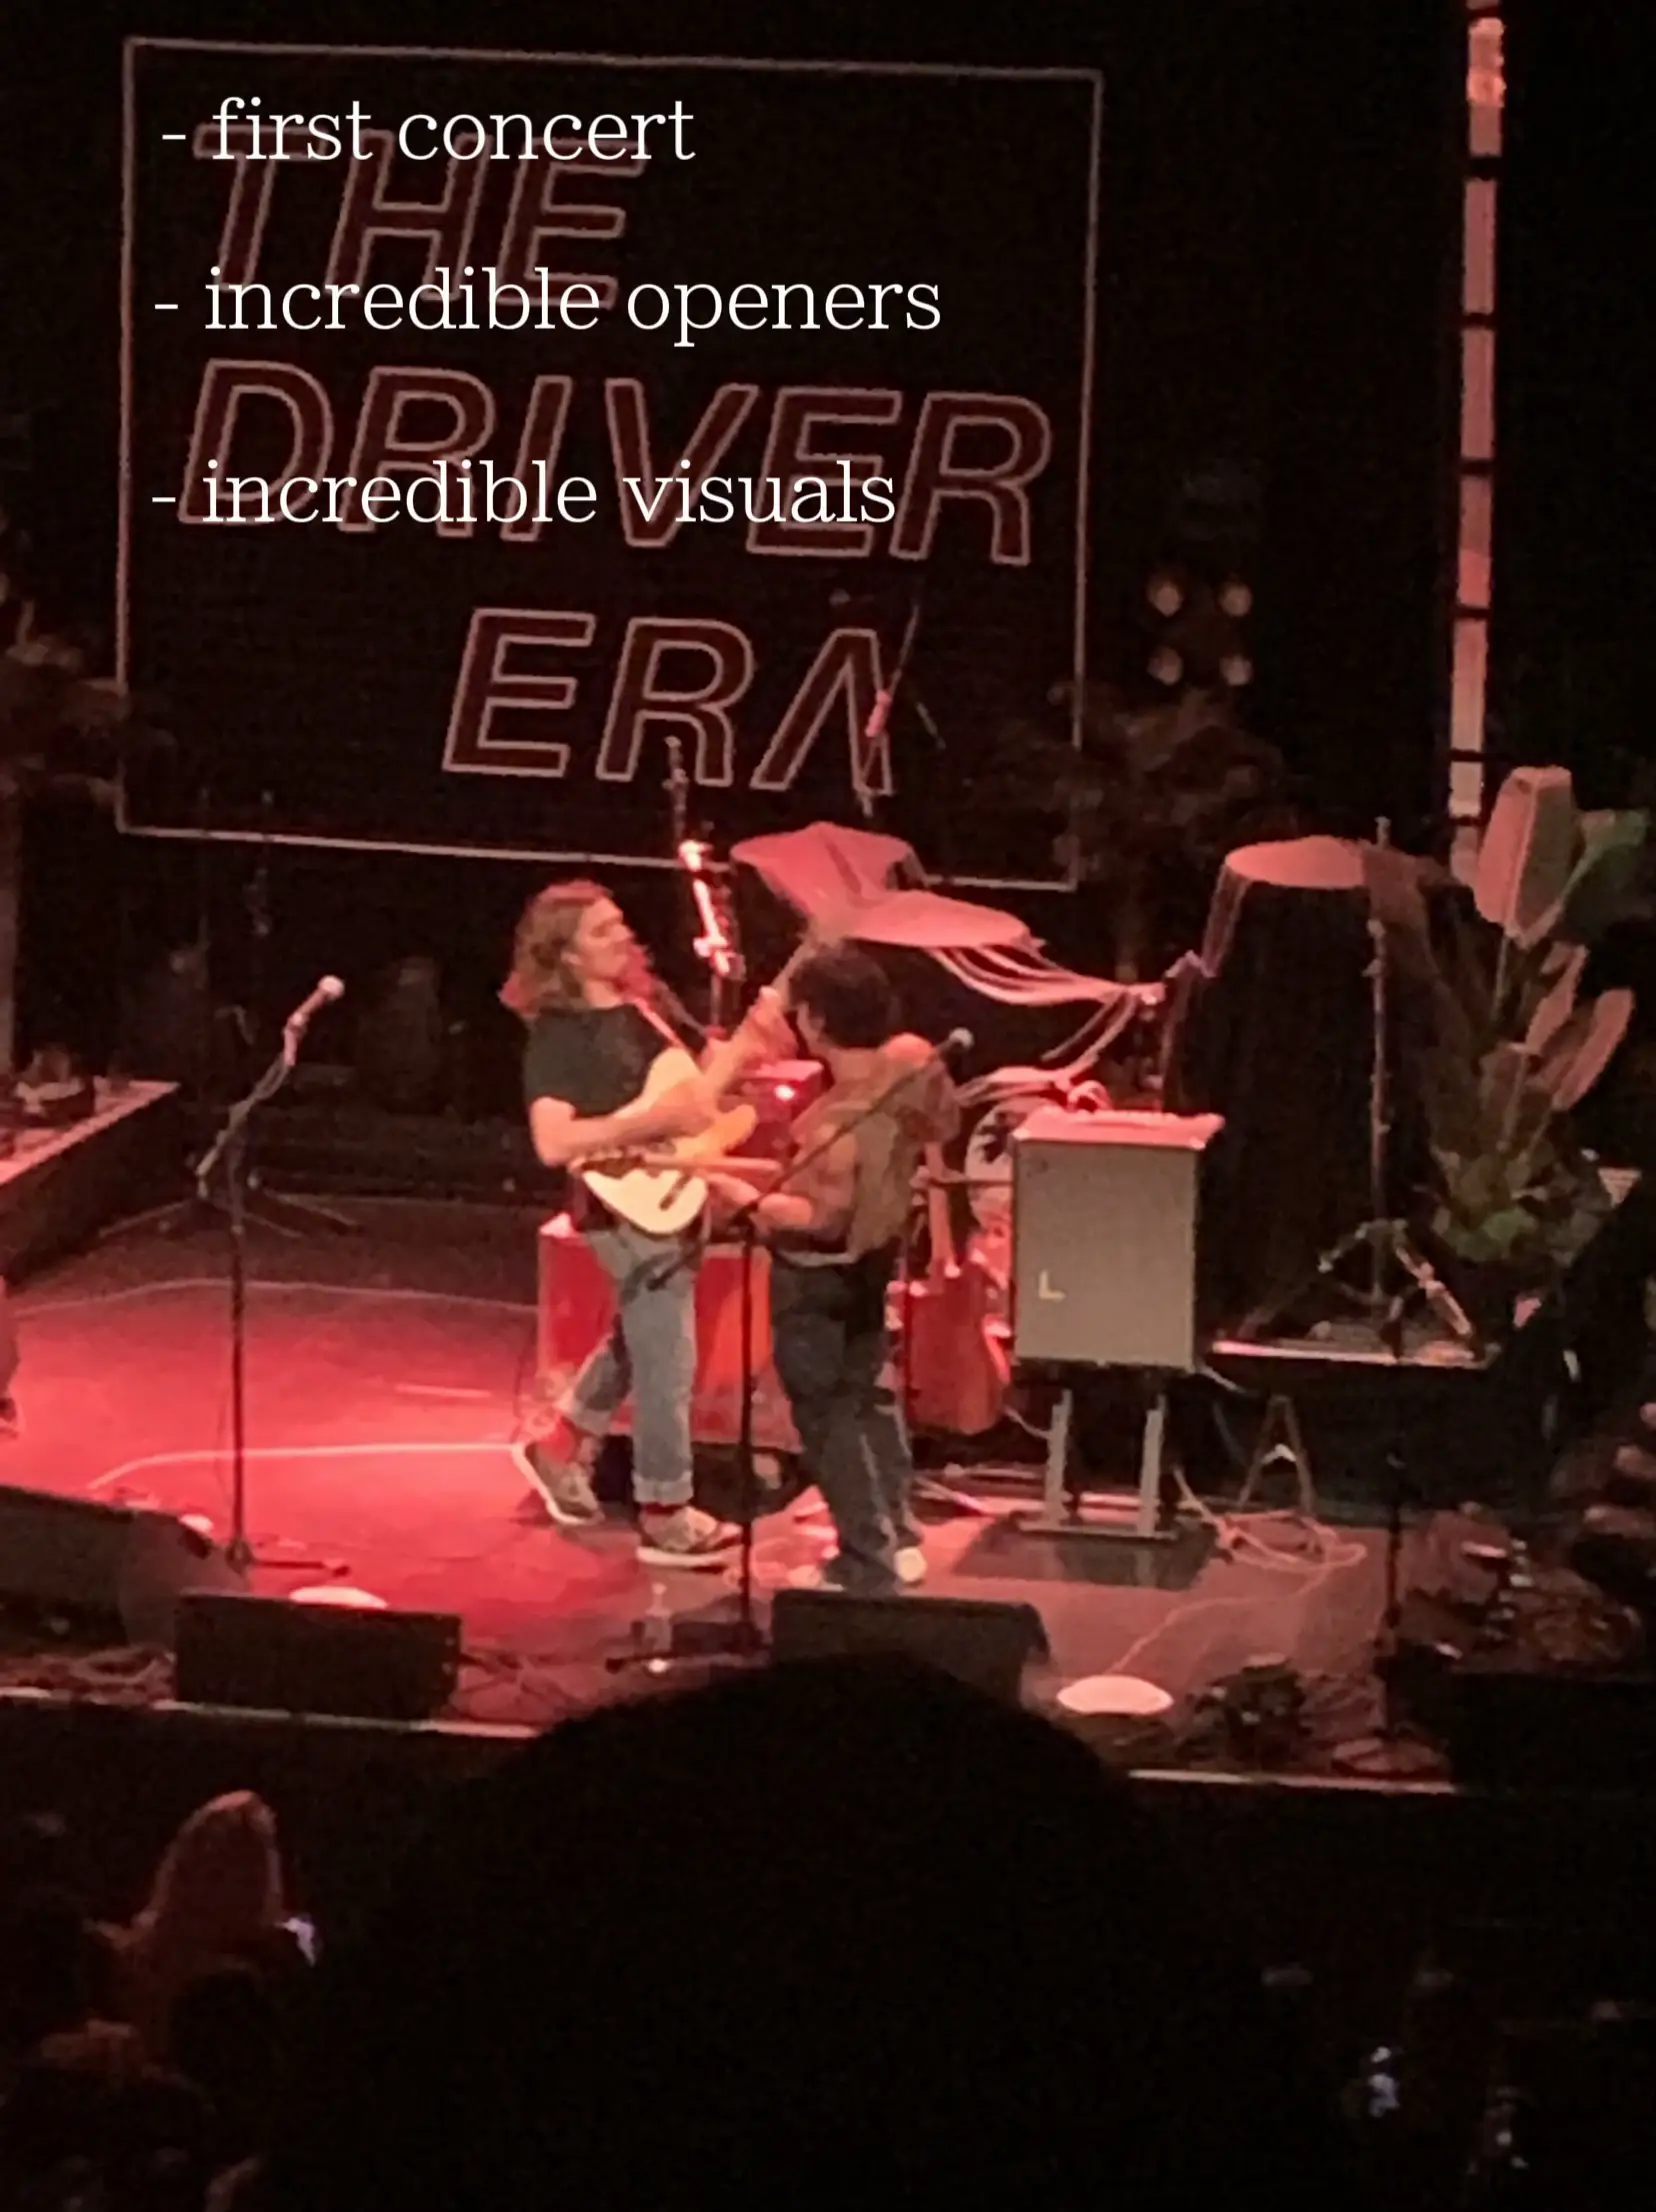  A man is playing guitar in front of another man.